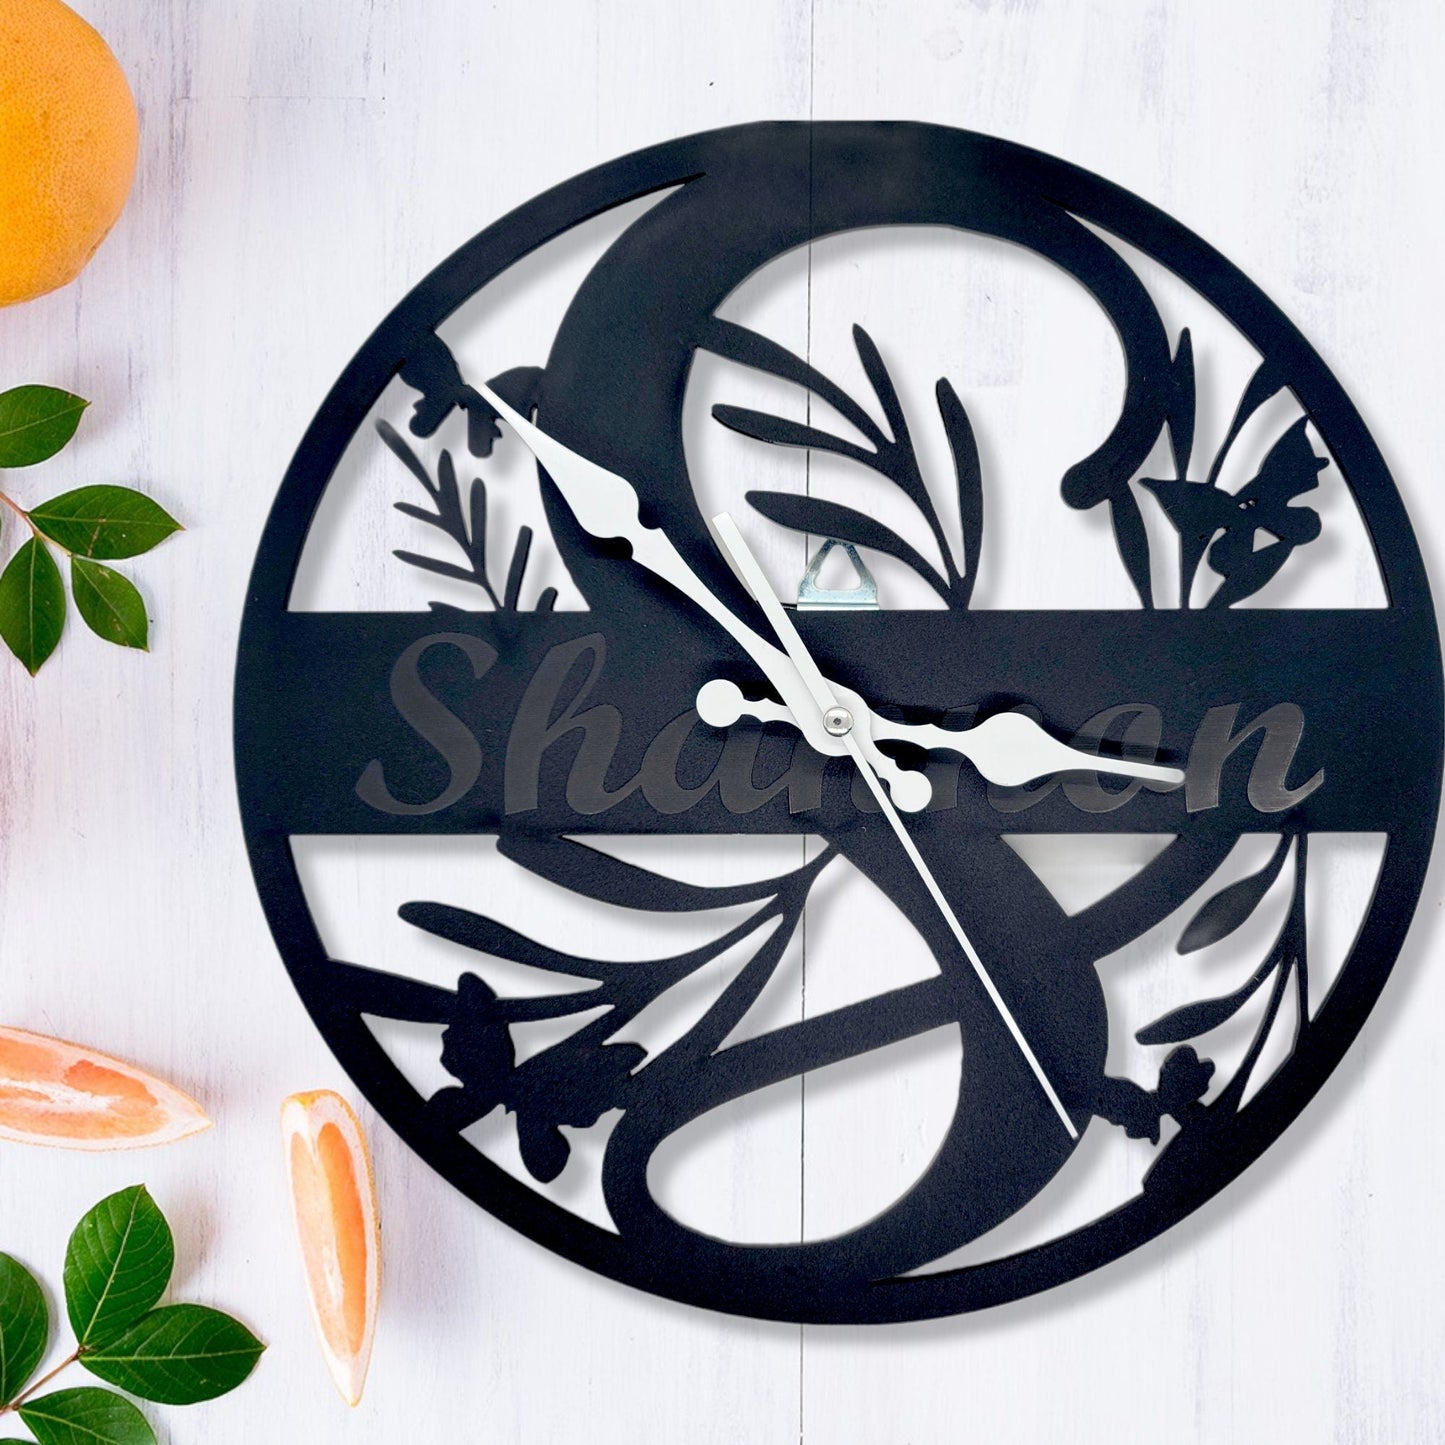 Personalized Monogramed Personalized Wall Clock